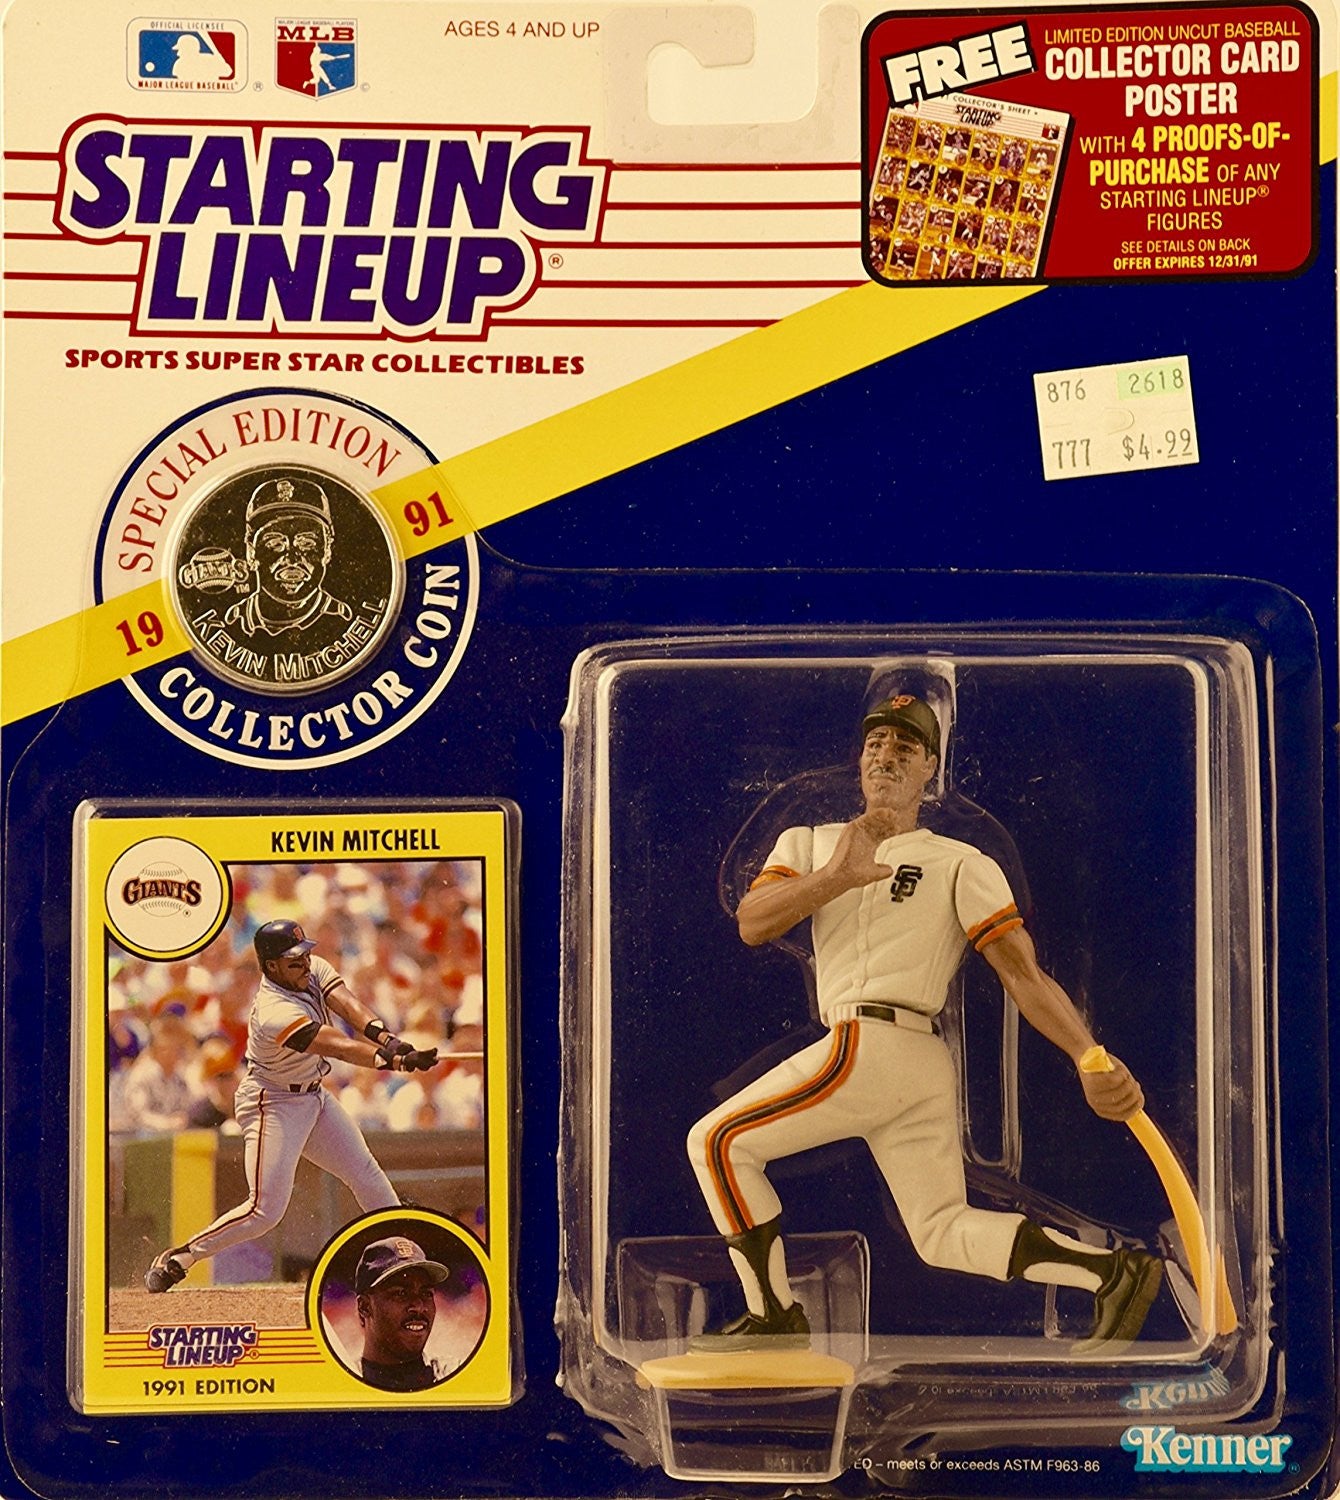 Starting Lineup 4" Action Figure - Major Leage Baseball (MLB) - San Francisco Giants - 1991 Special Edition - Kevin Mitchell